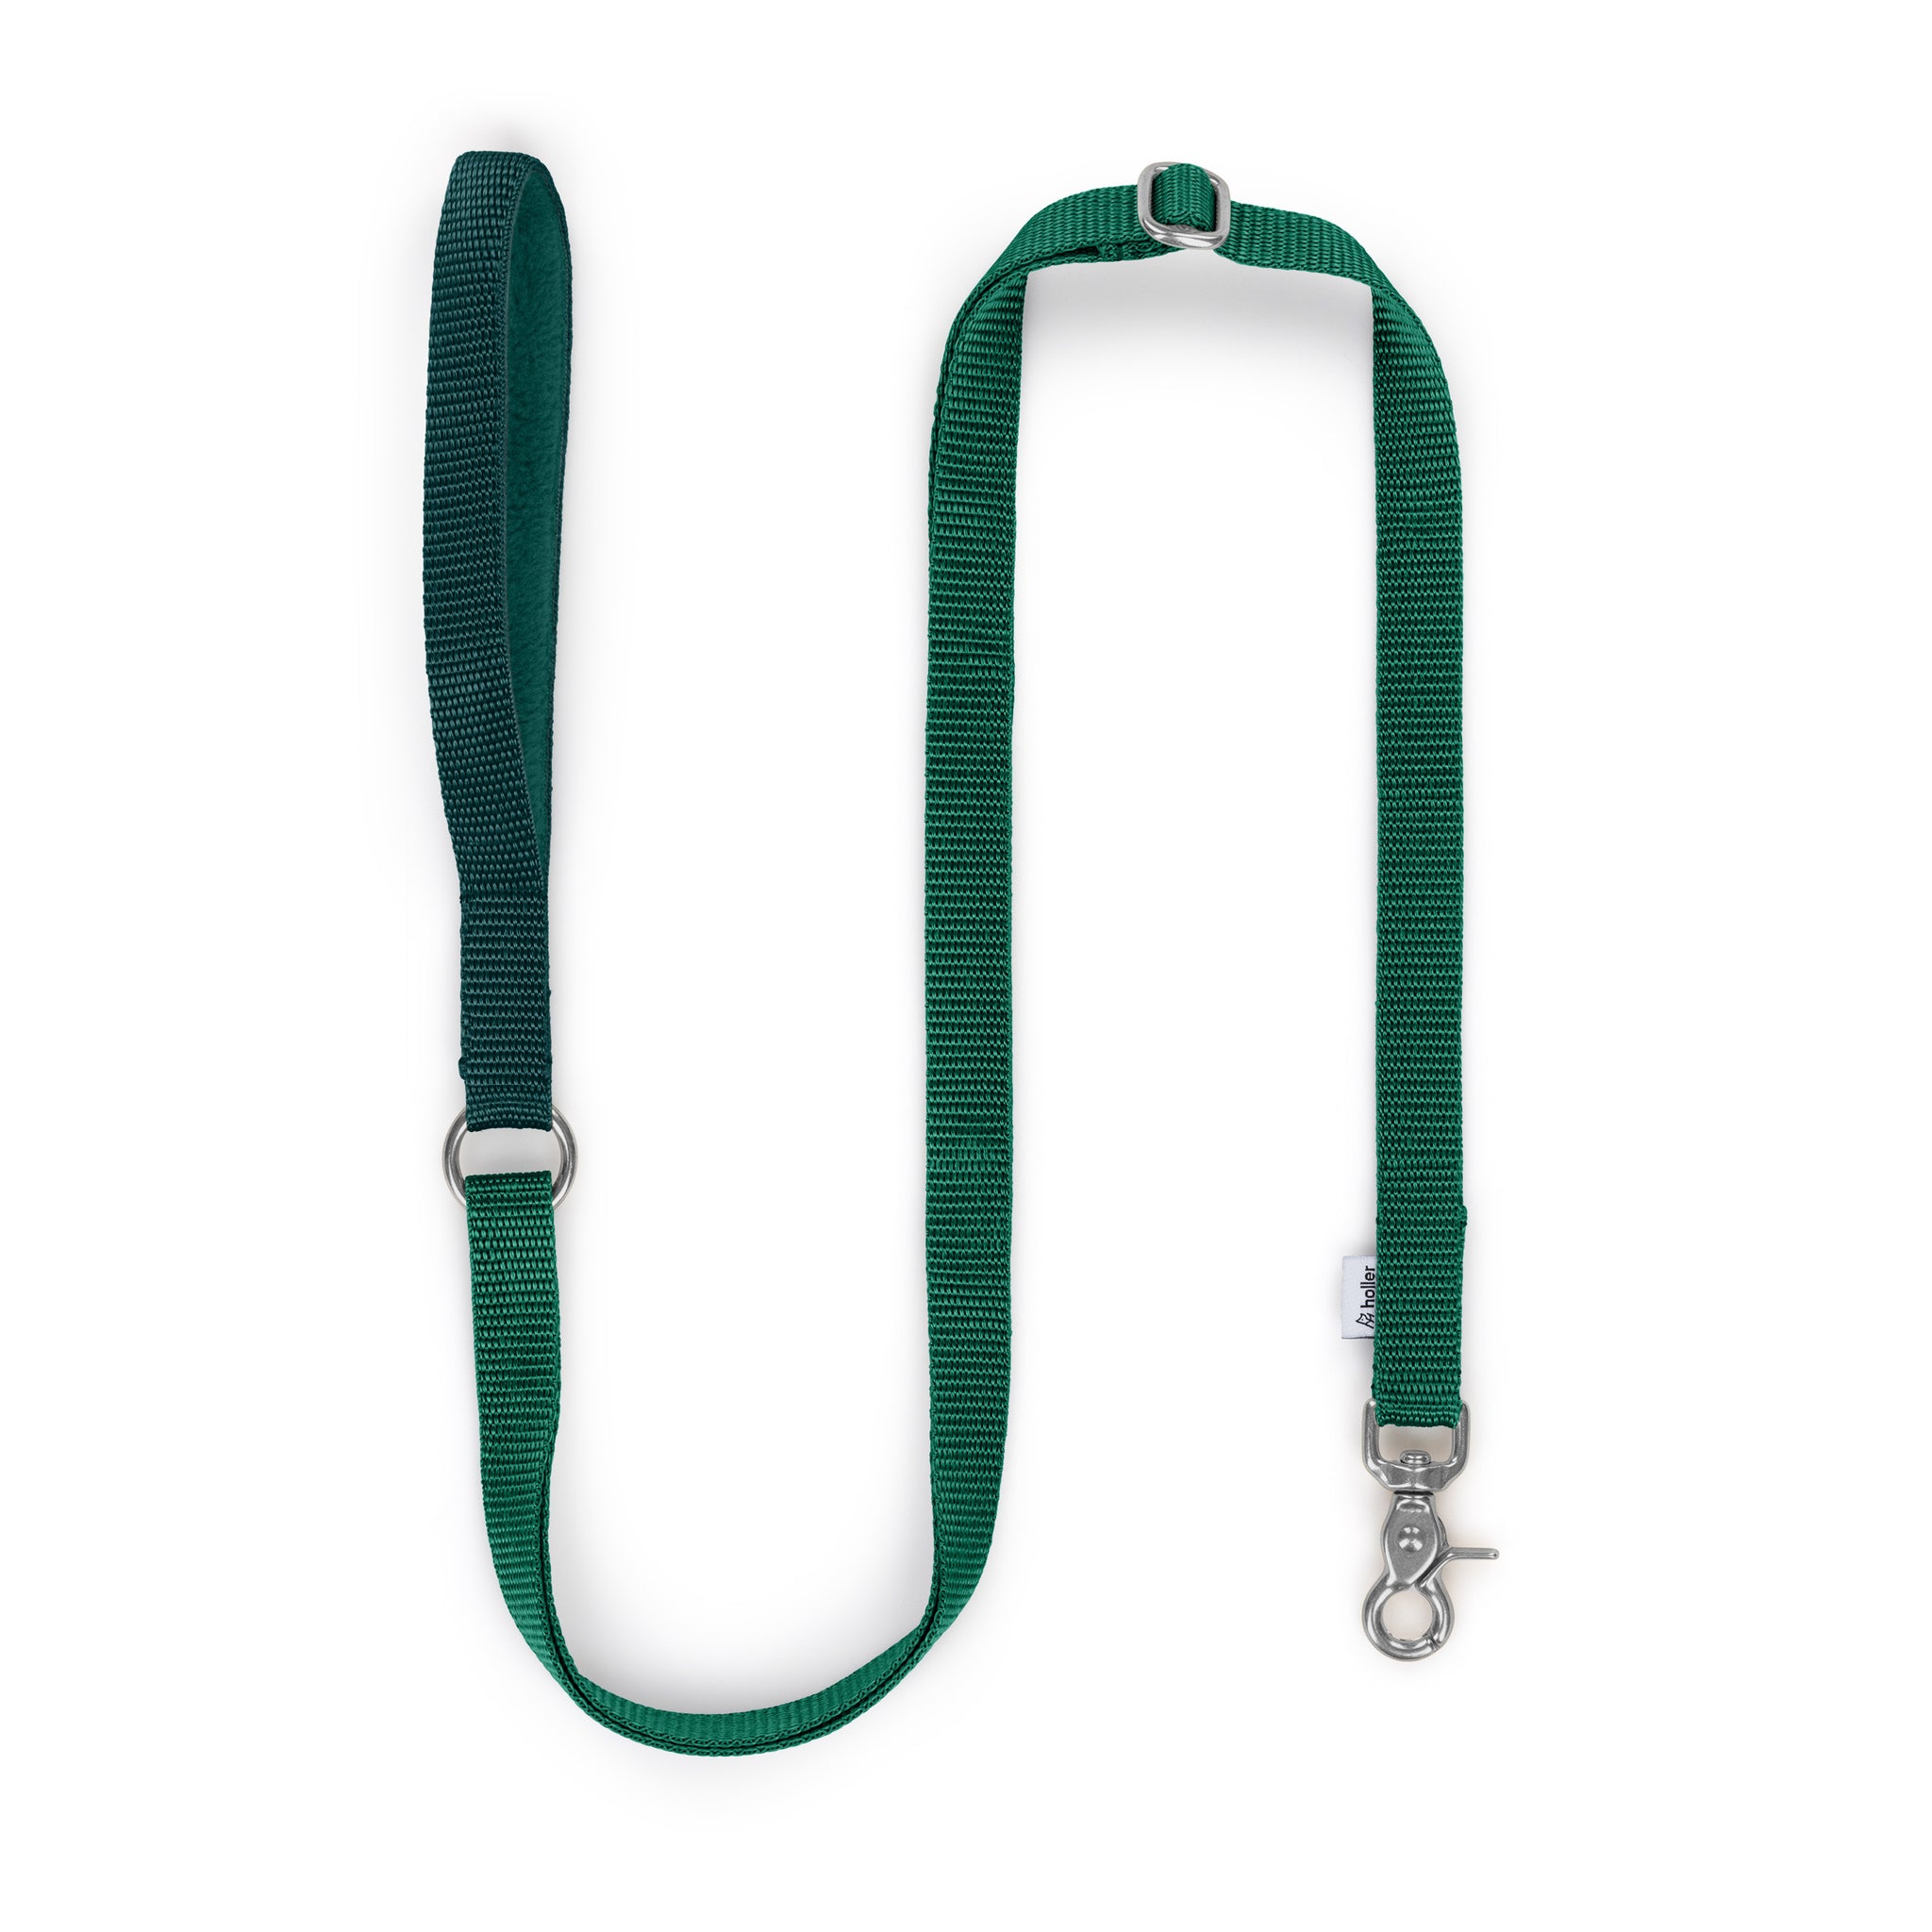 Emerald + Forest Green - Custom-made Extendable Lead - With Soft Touch Handle. - Pet Leashes - Holler Brighton - Holler Brighton